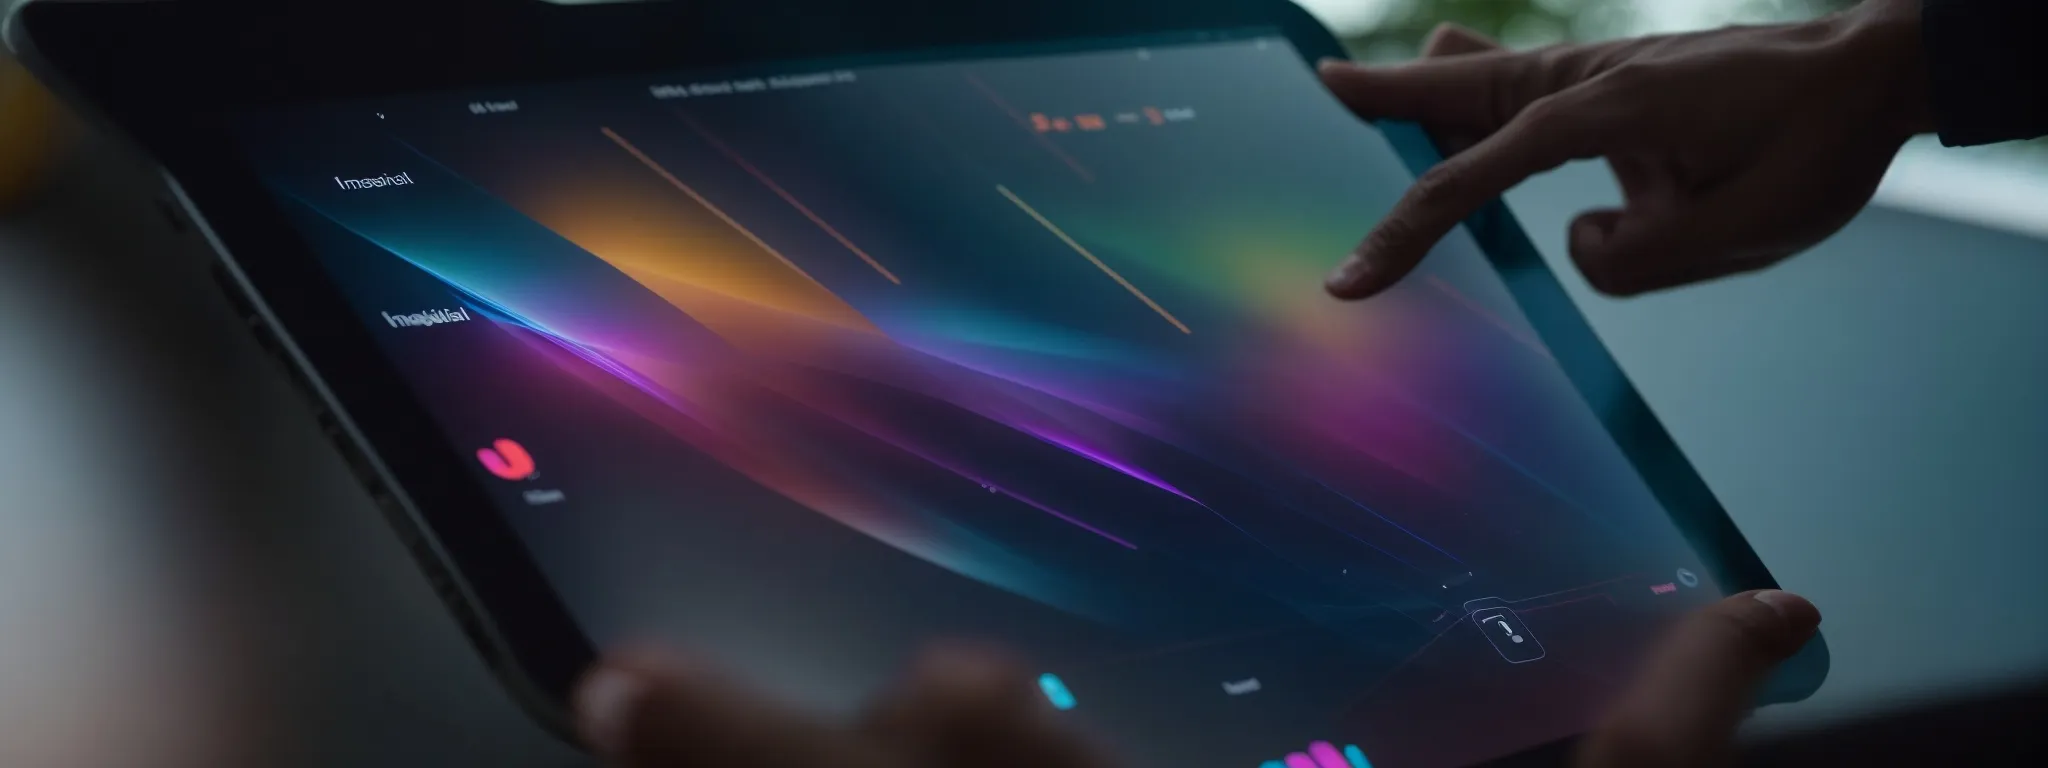 a person interacts with an intuitive touchscreen interface displaying colorful graphics indicative of ai functionality.